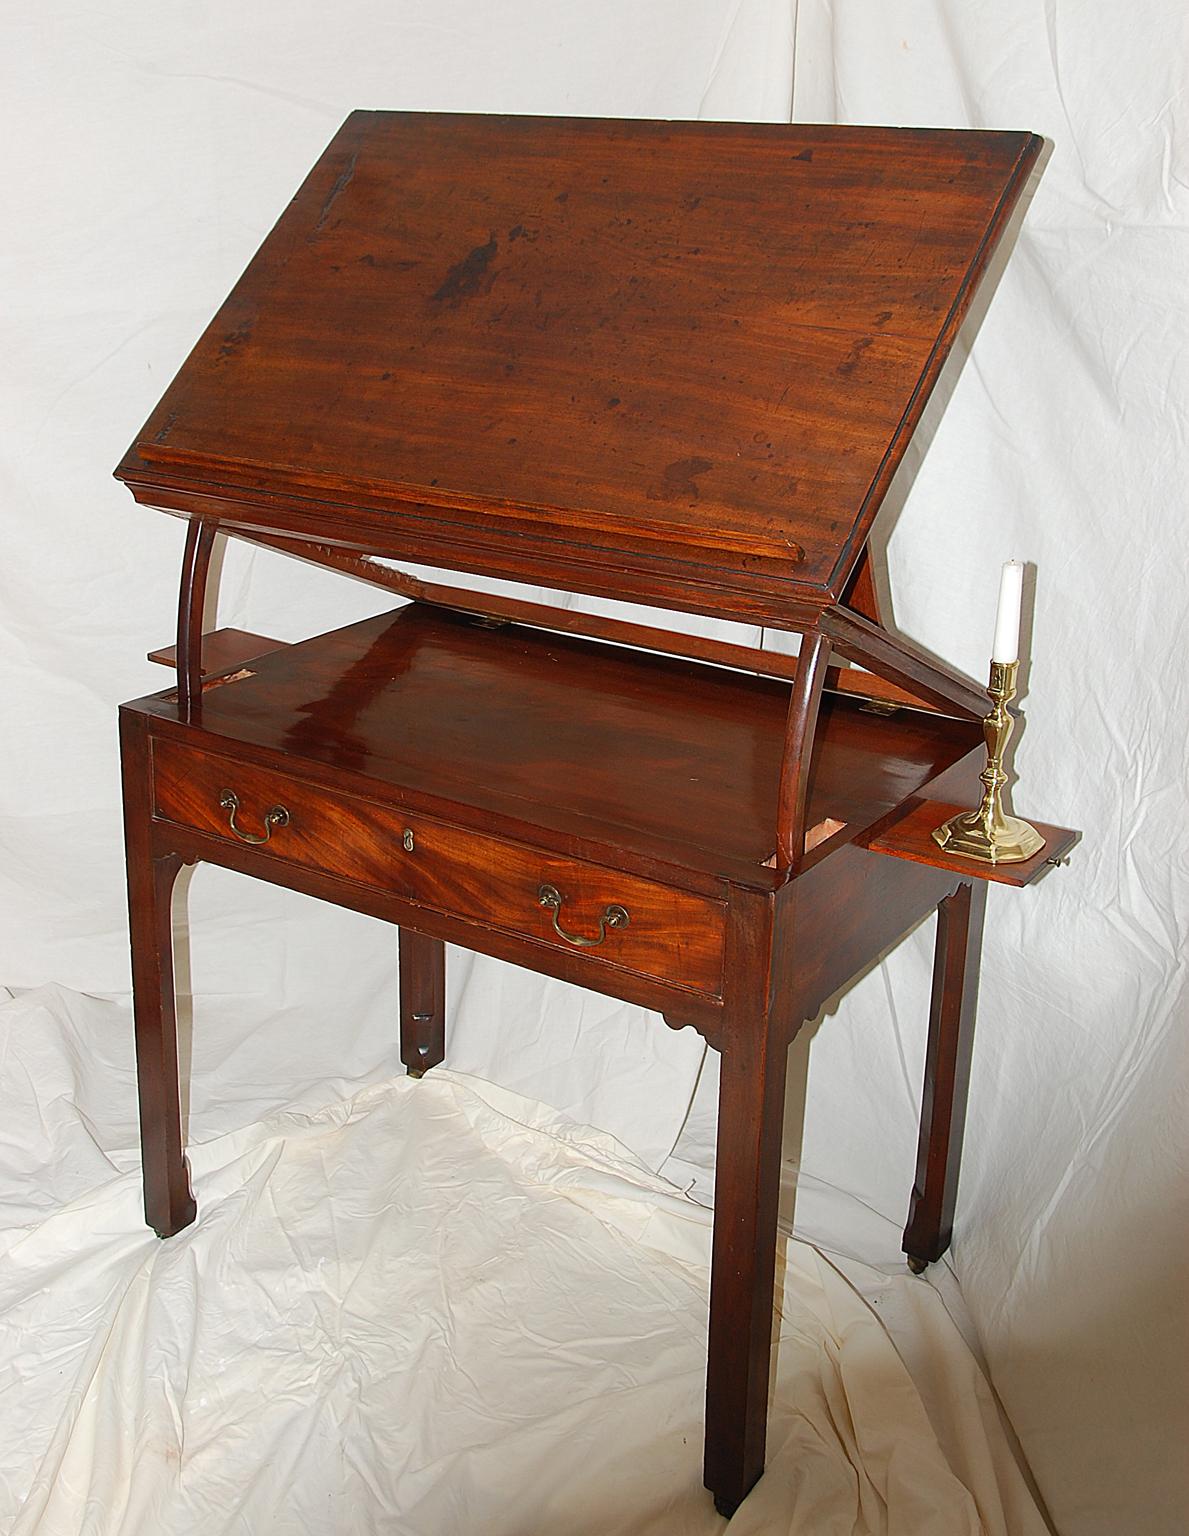 This English Georgian Chippendale period architect's table in mahogany has two side candle slides, a long drawer, and a rising top. The top has a feature that allows it to rise using a double articulating mechanism. There is a removable paper rest